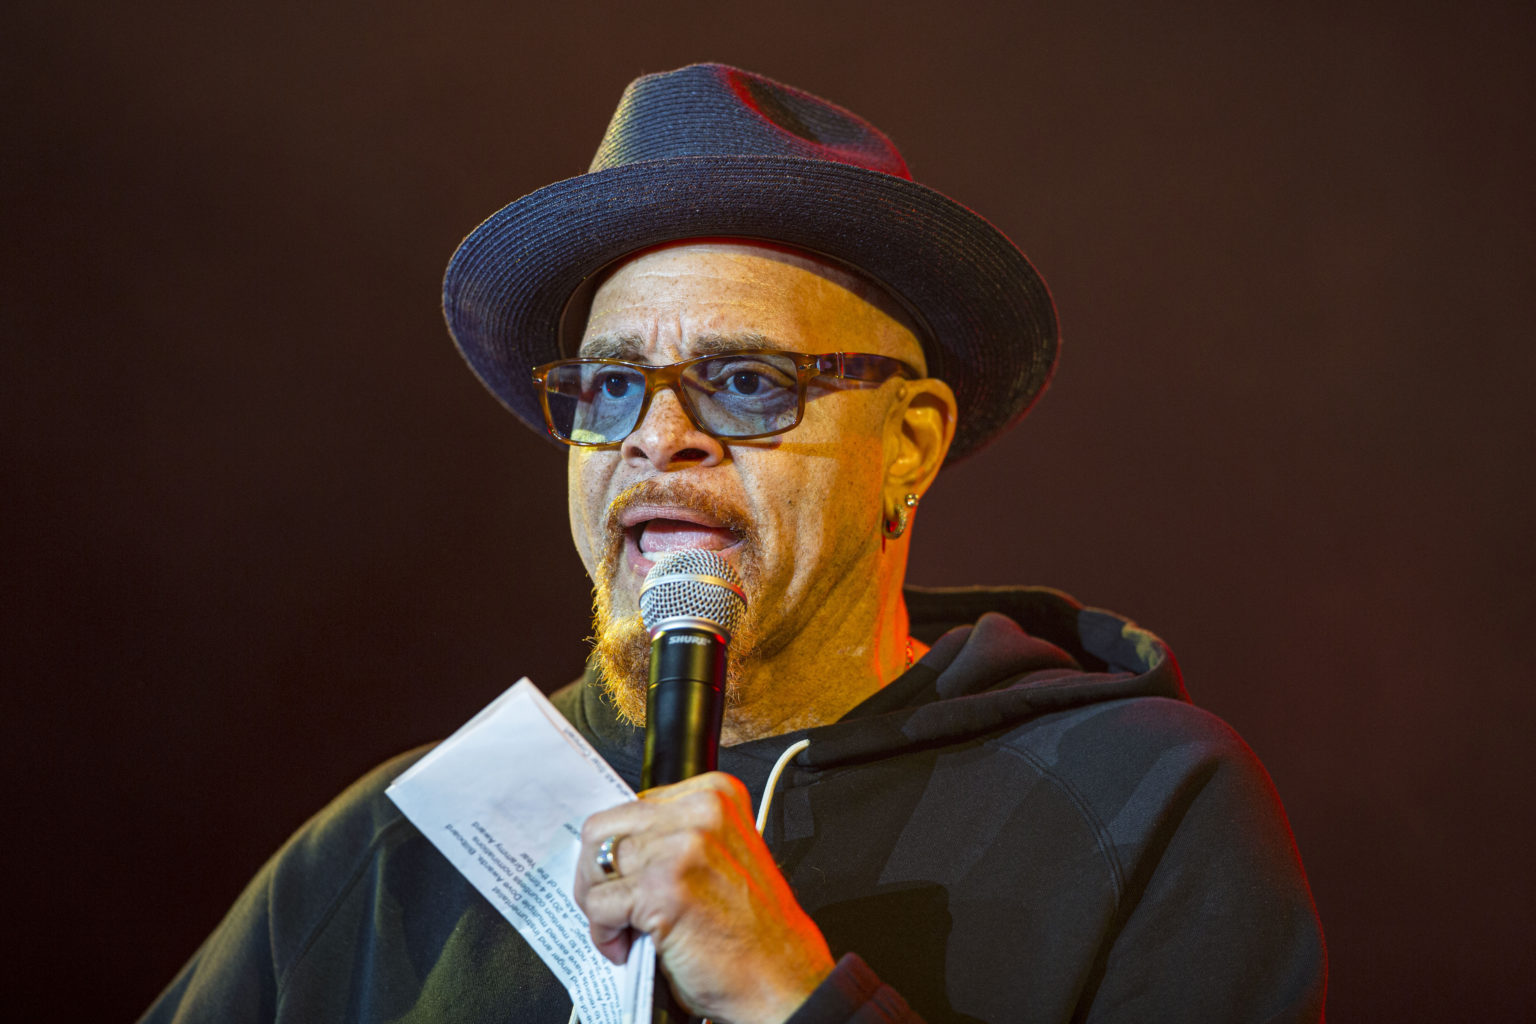 Comedian Sinbad is ‘Beginning his Road to Recovery’ After Suffering